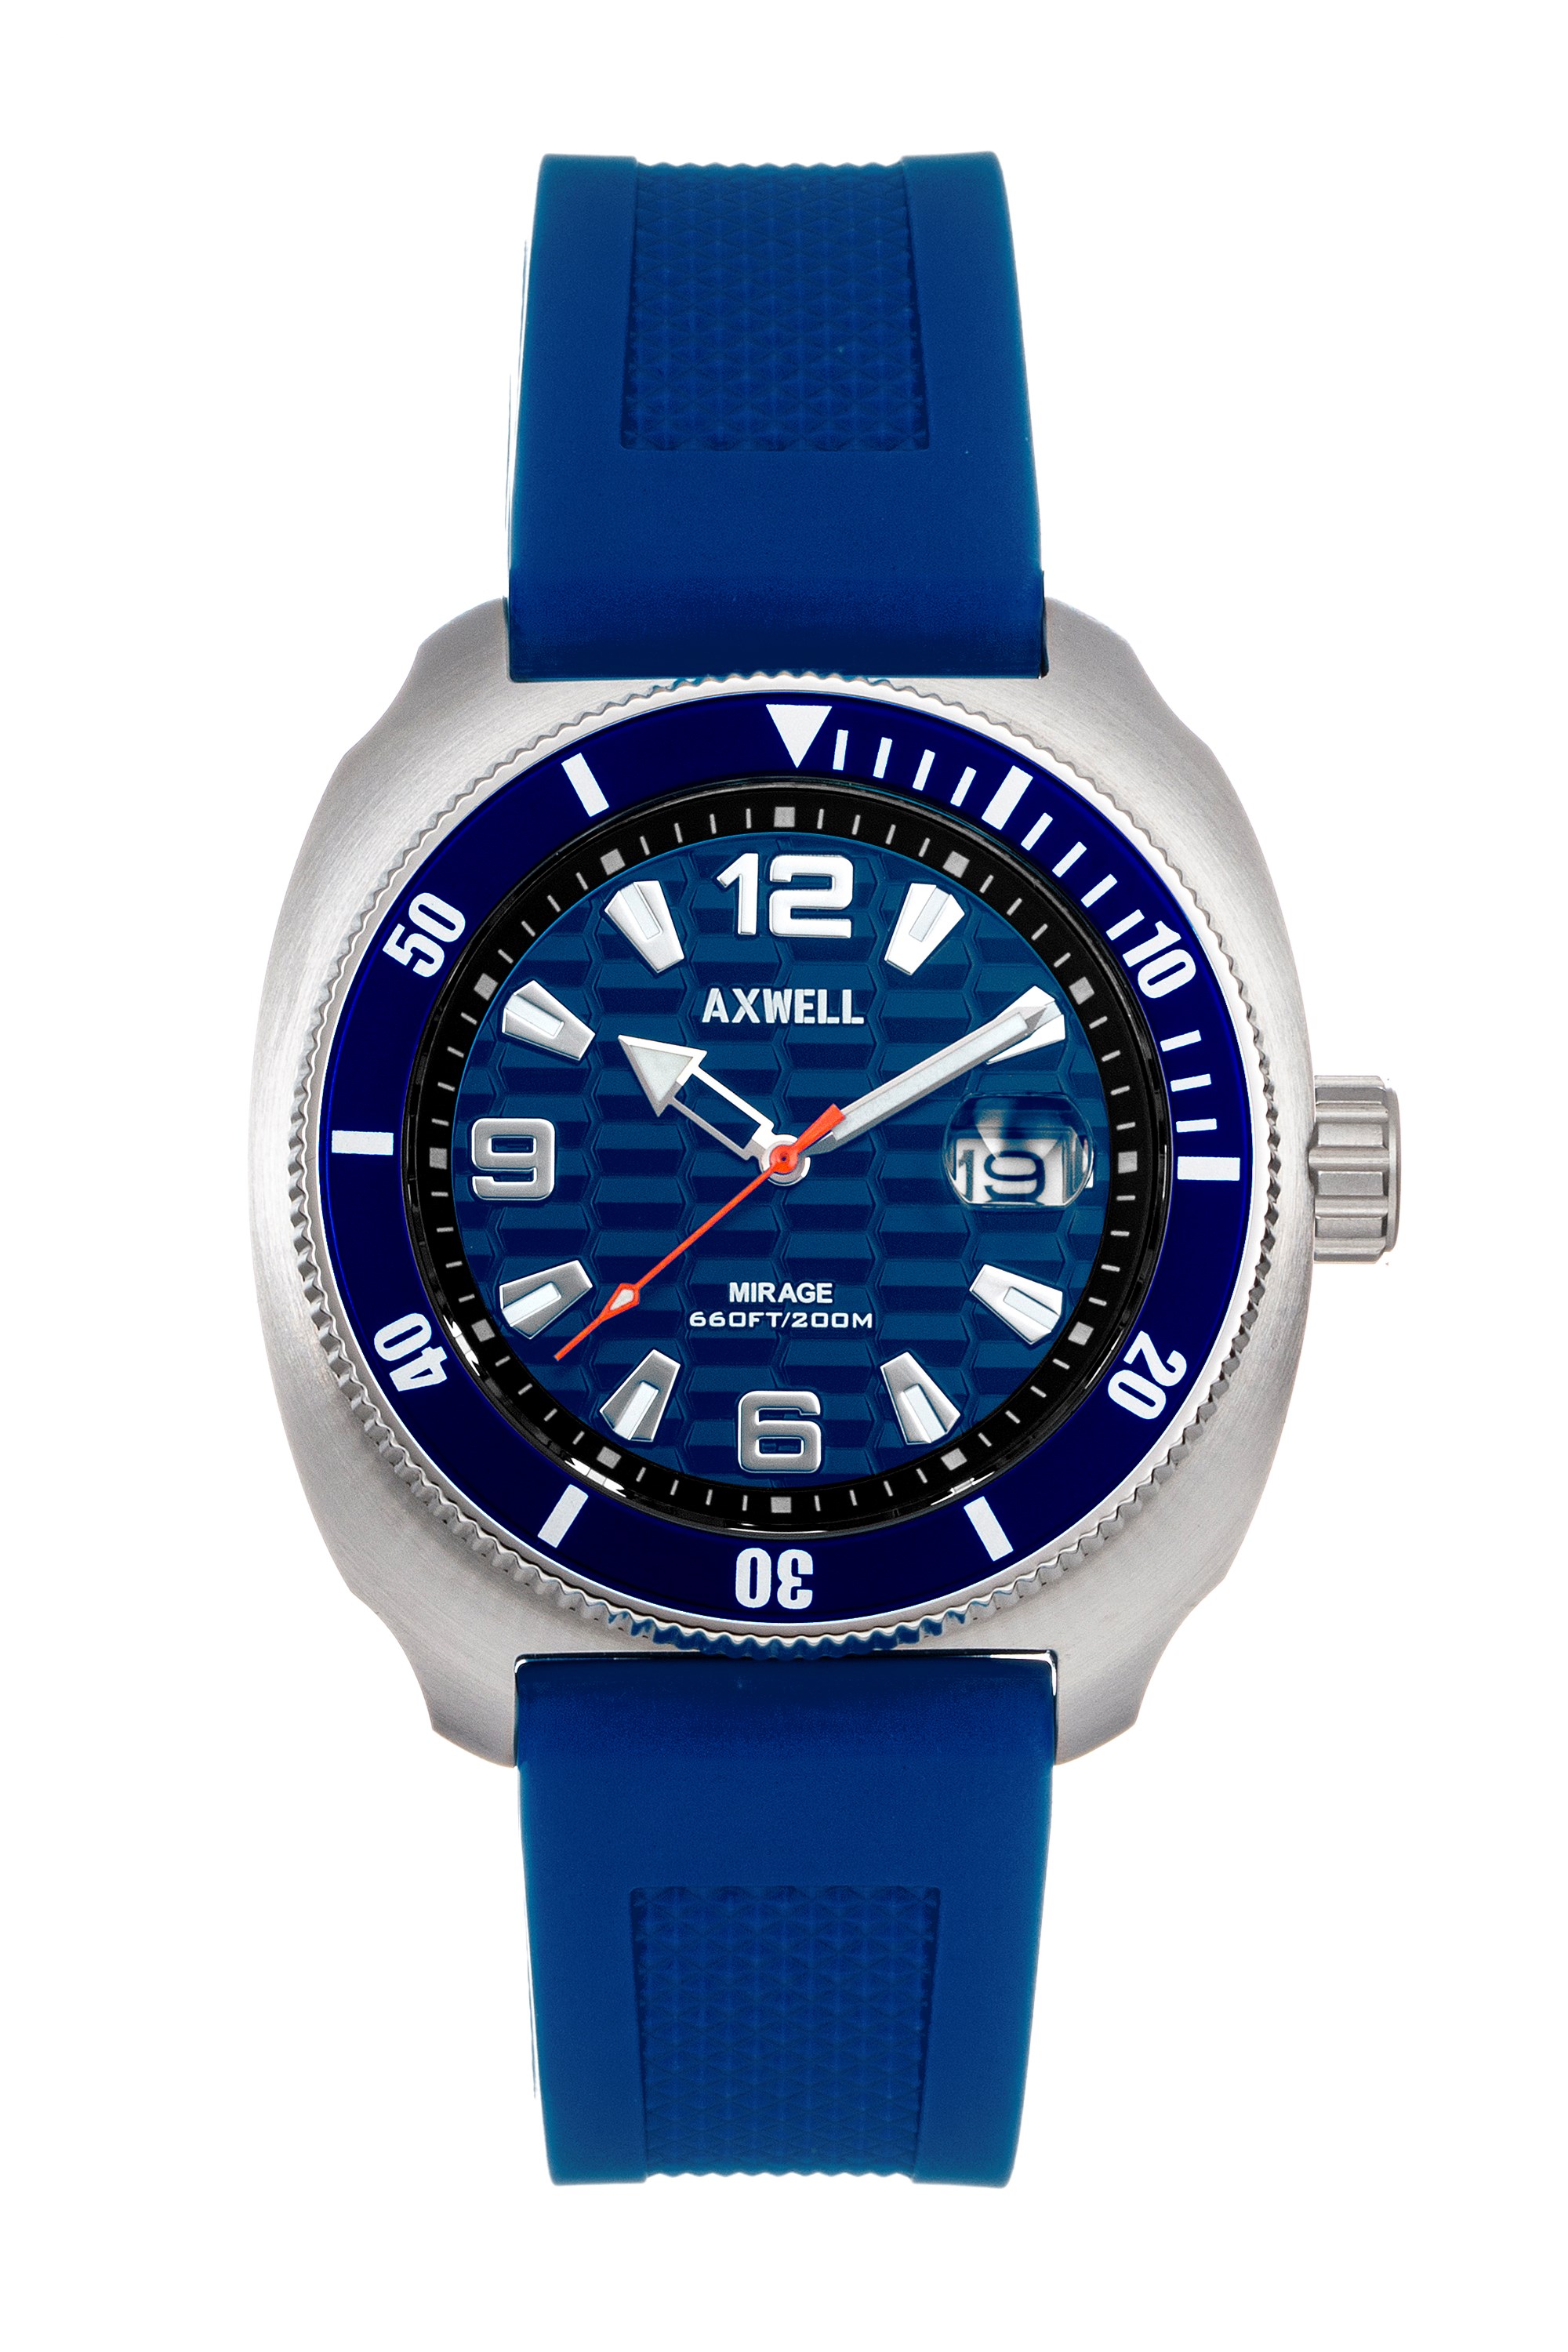 Mirage Silicone Strap Deep Diving Watch With Date -